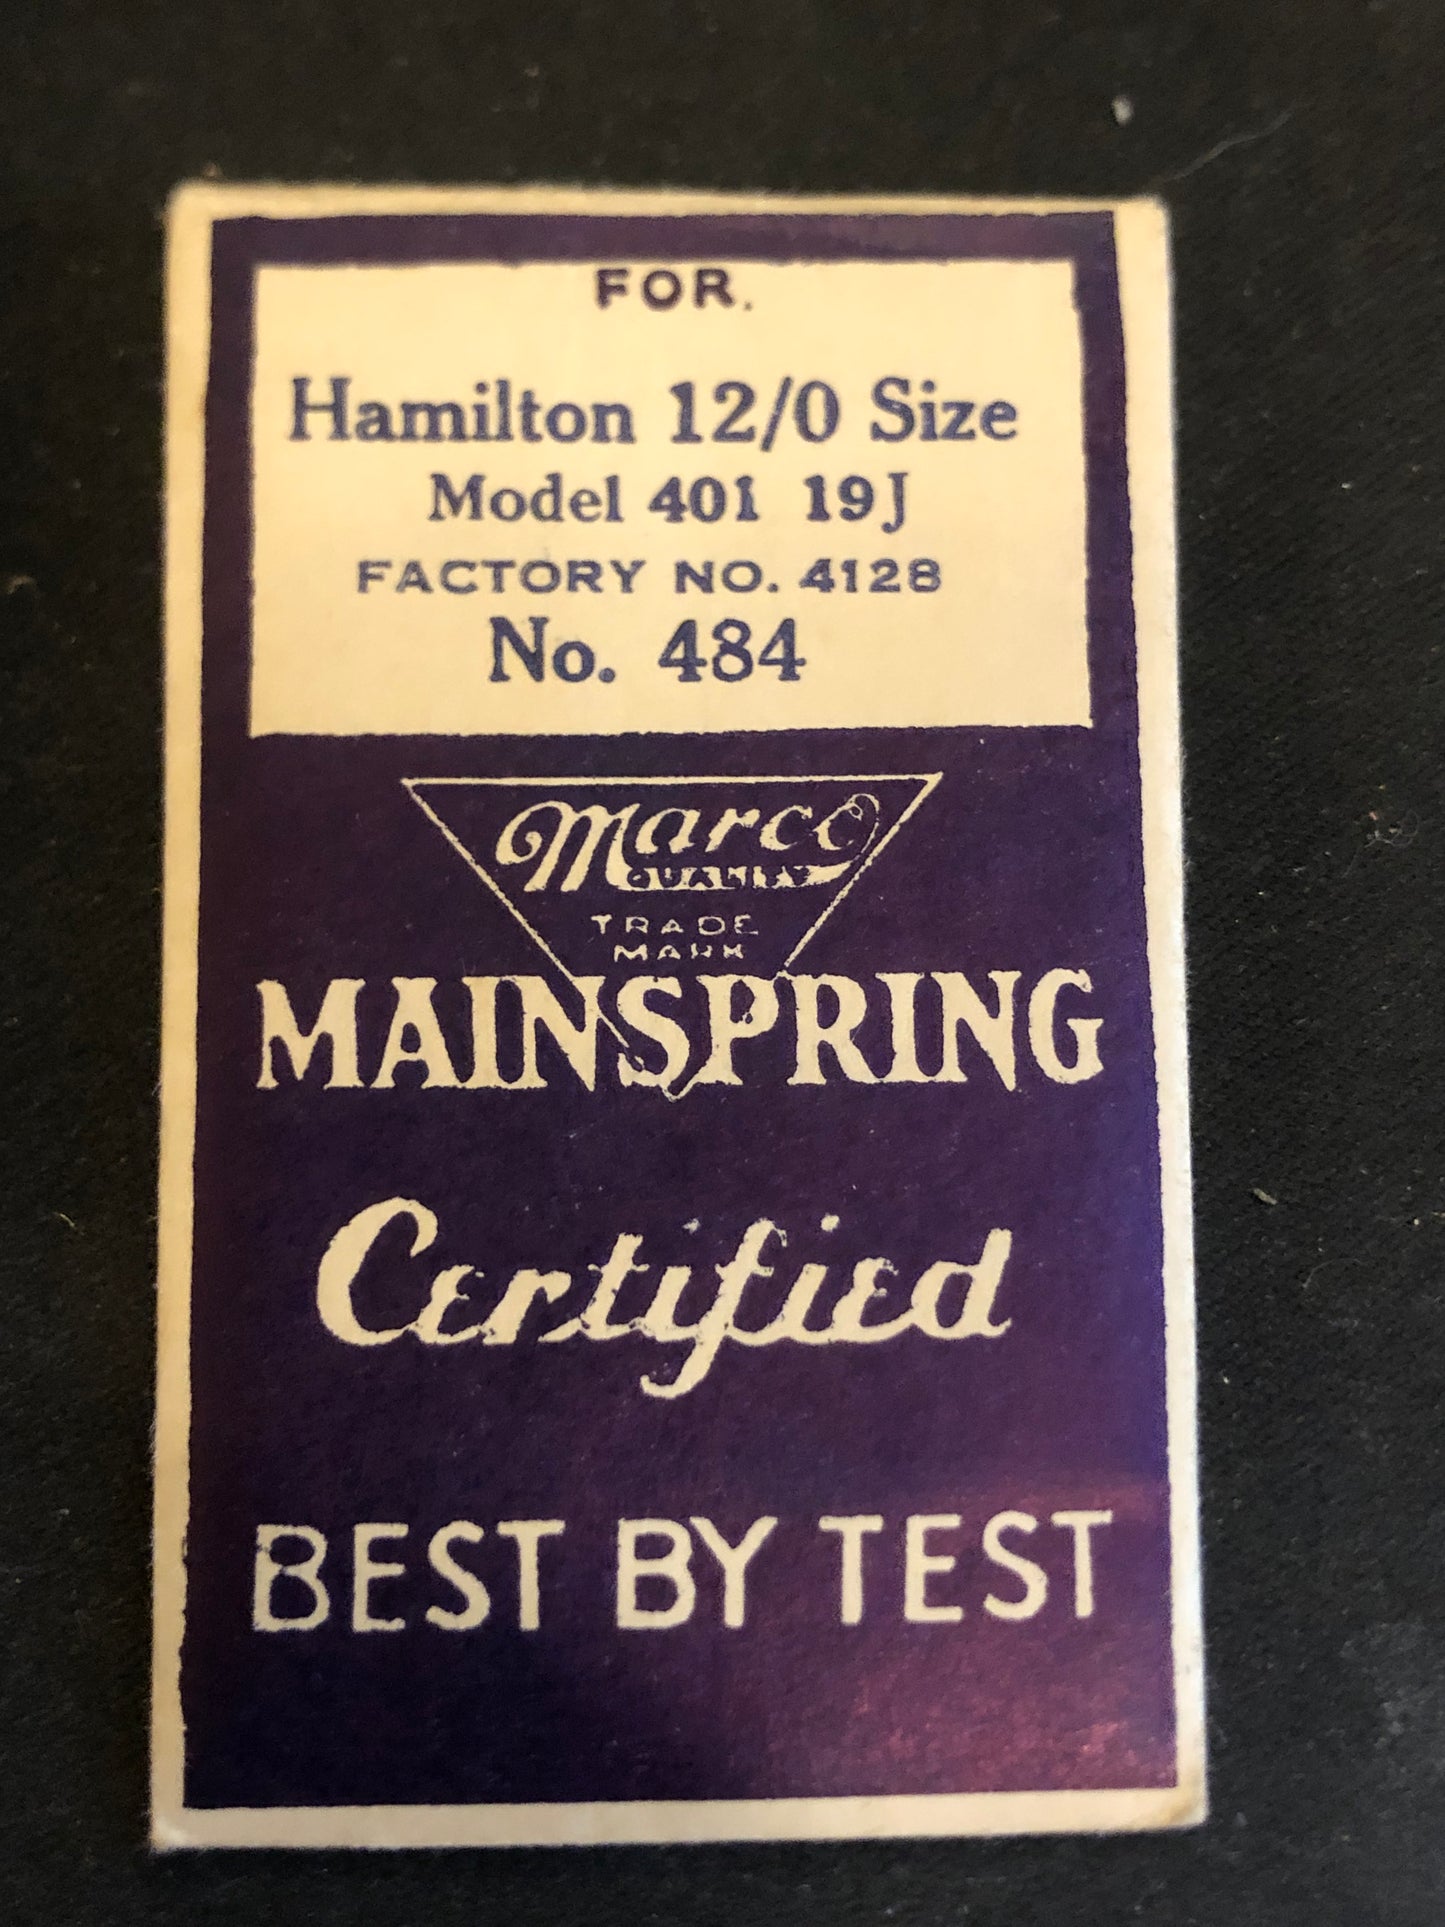 Marco Mainspring #484 for Hamilton 12/0s Model 401 No. 4128 - Steel